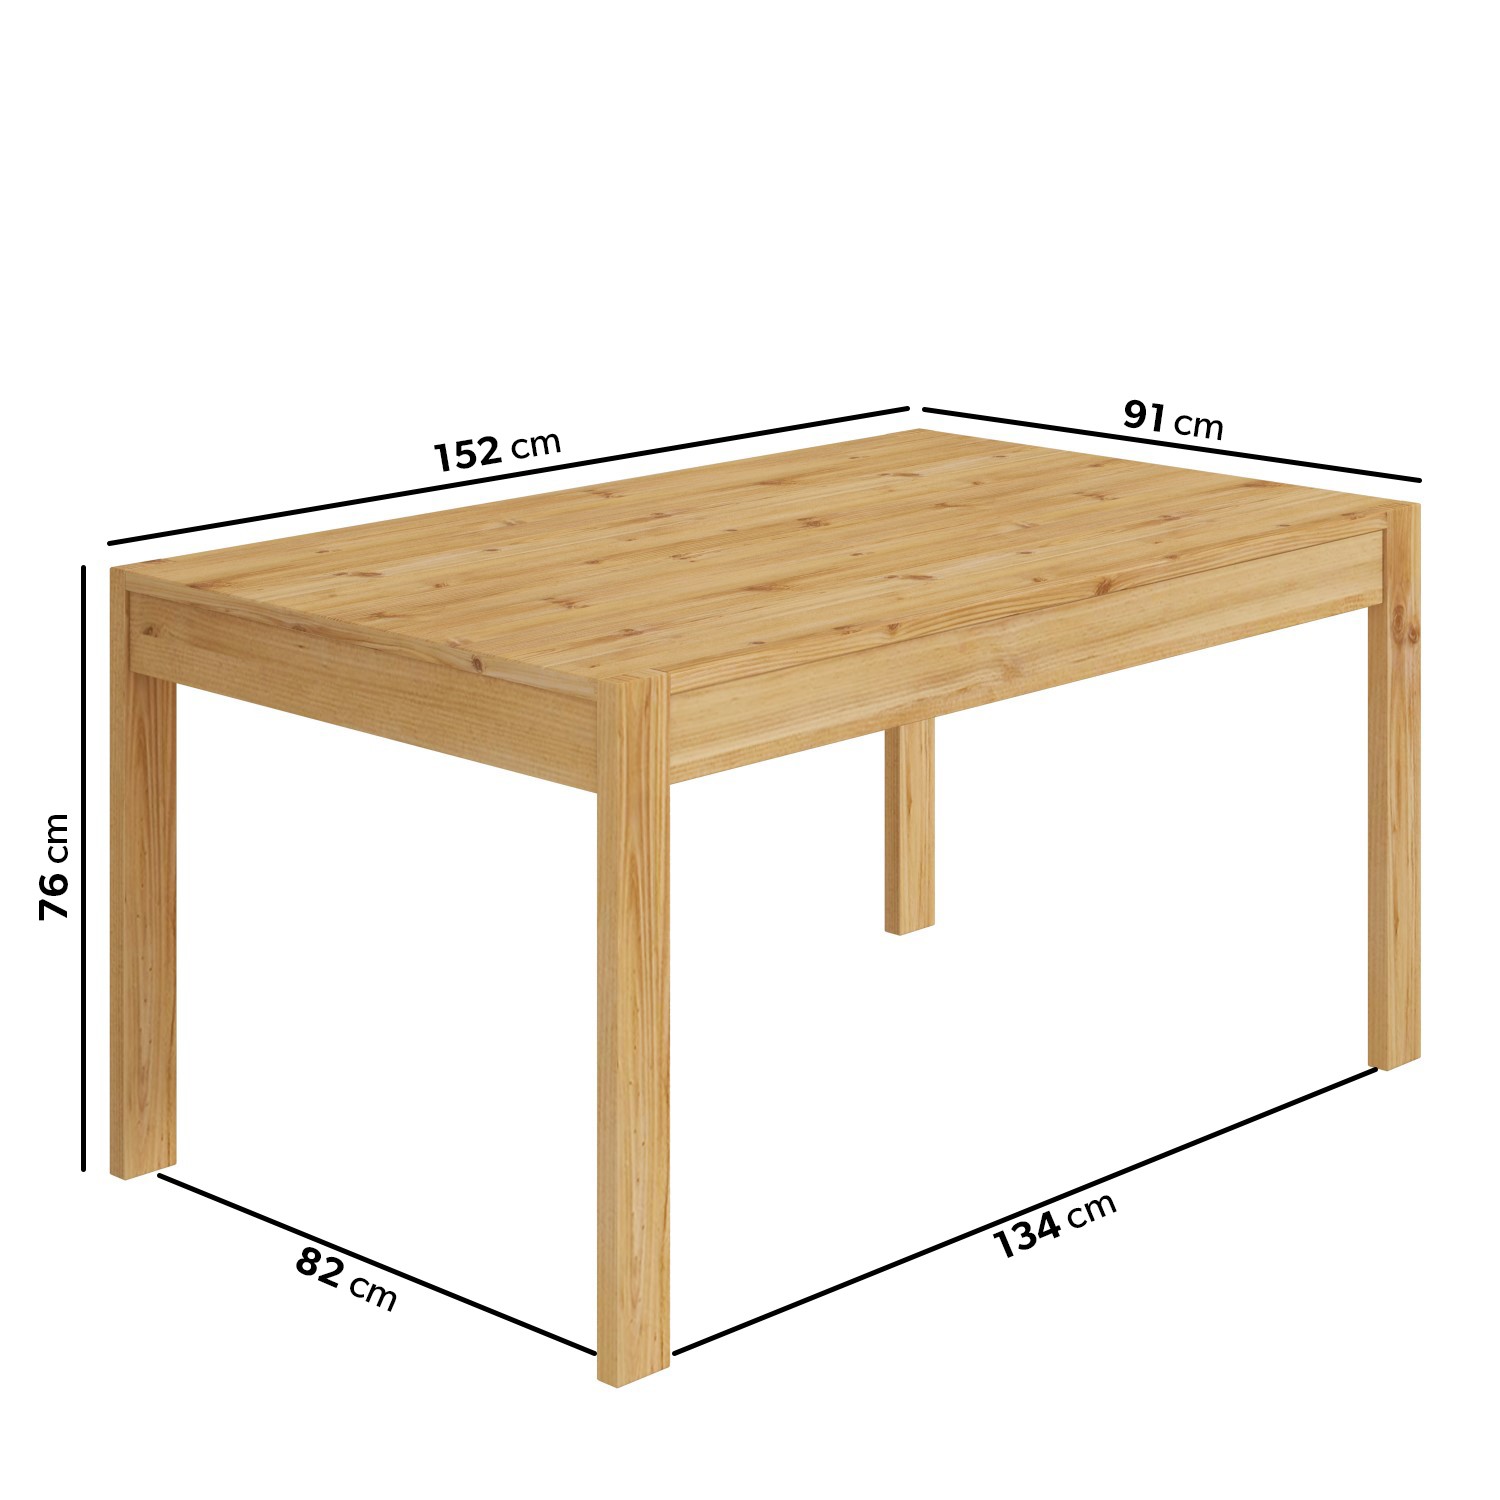 Read more about Rectangle solid pine dining table seats 6 emerson